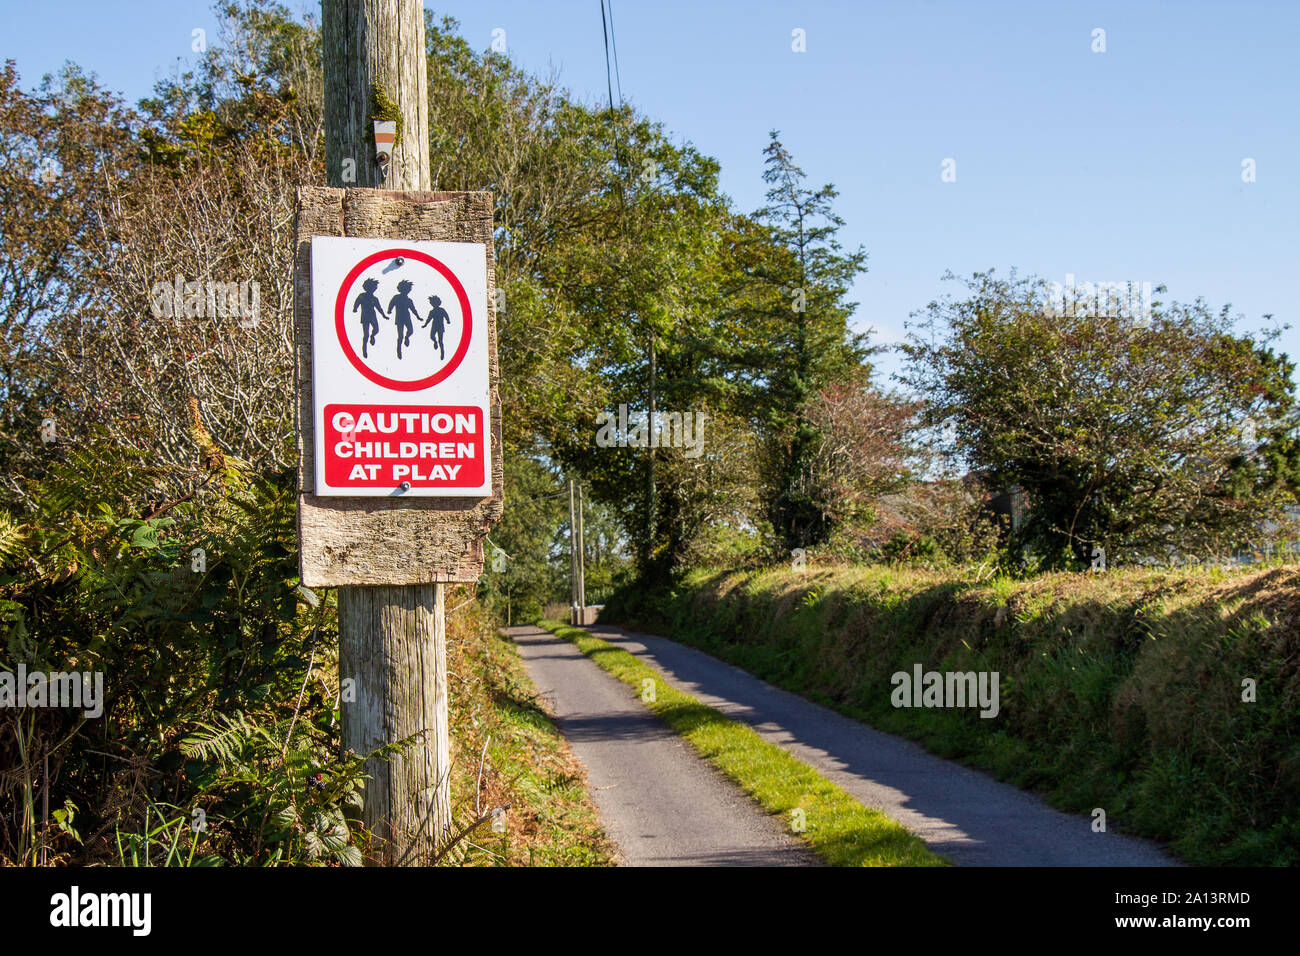 caution children at play warning sign on a country road Stock Photo